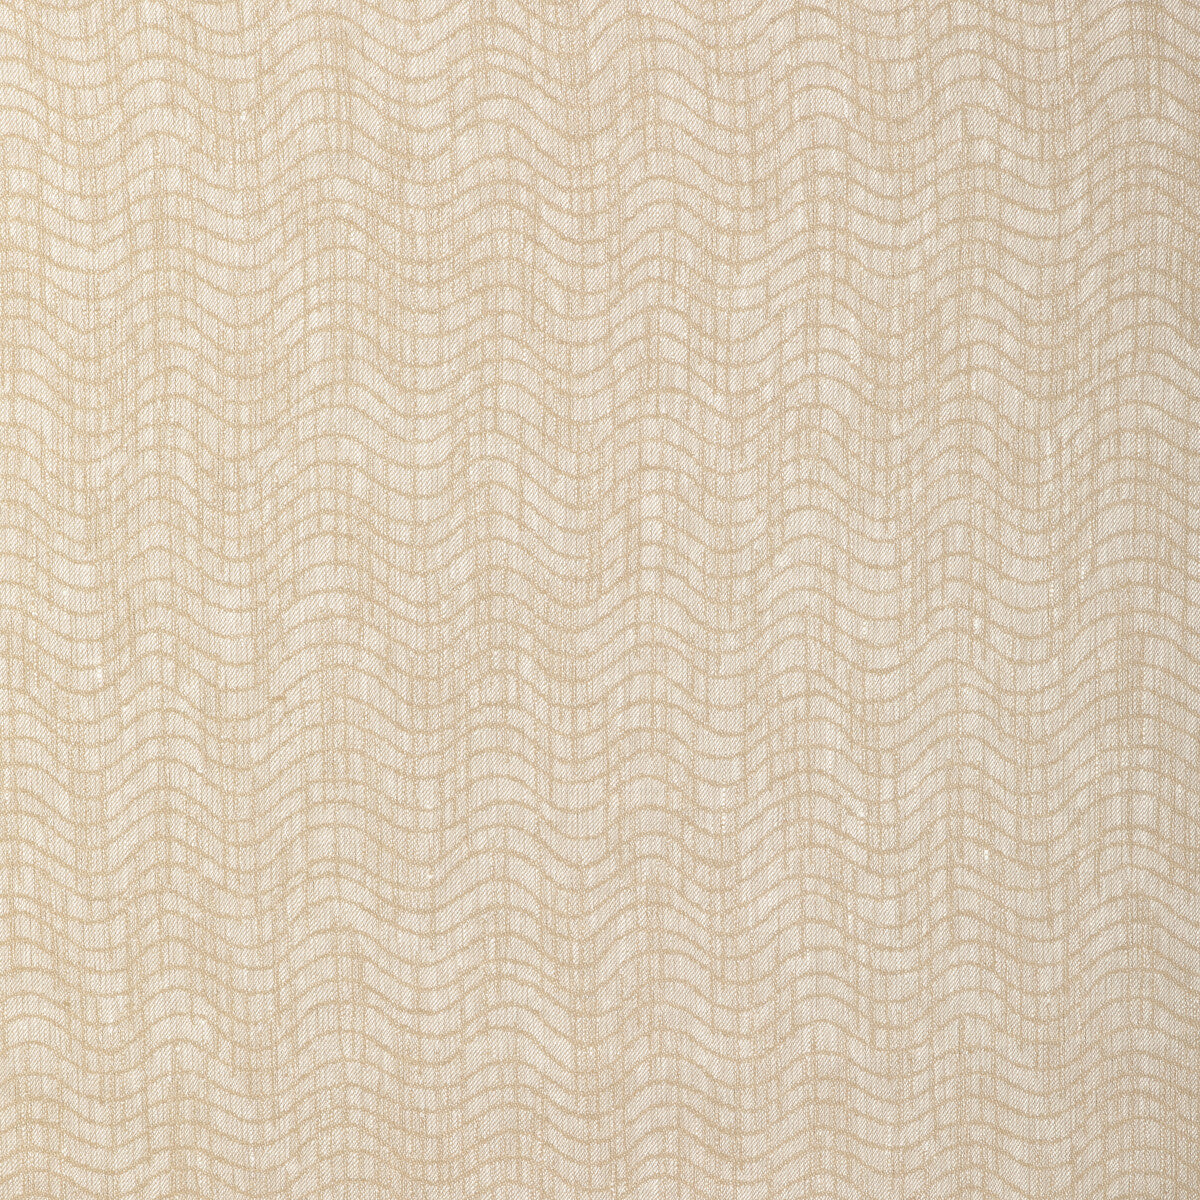 Dadami fabric in honey color - pattern GWF-3801.116.0 - by Lee Jofa Modern in the Kelly Wearstler VIII collection